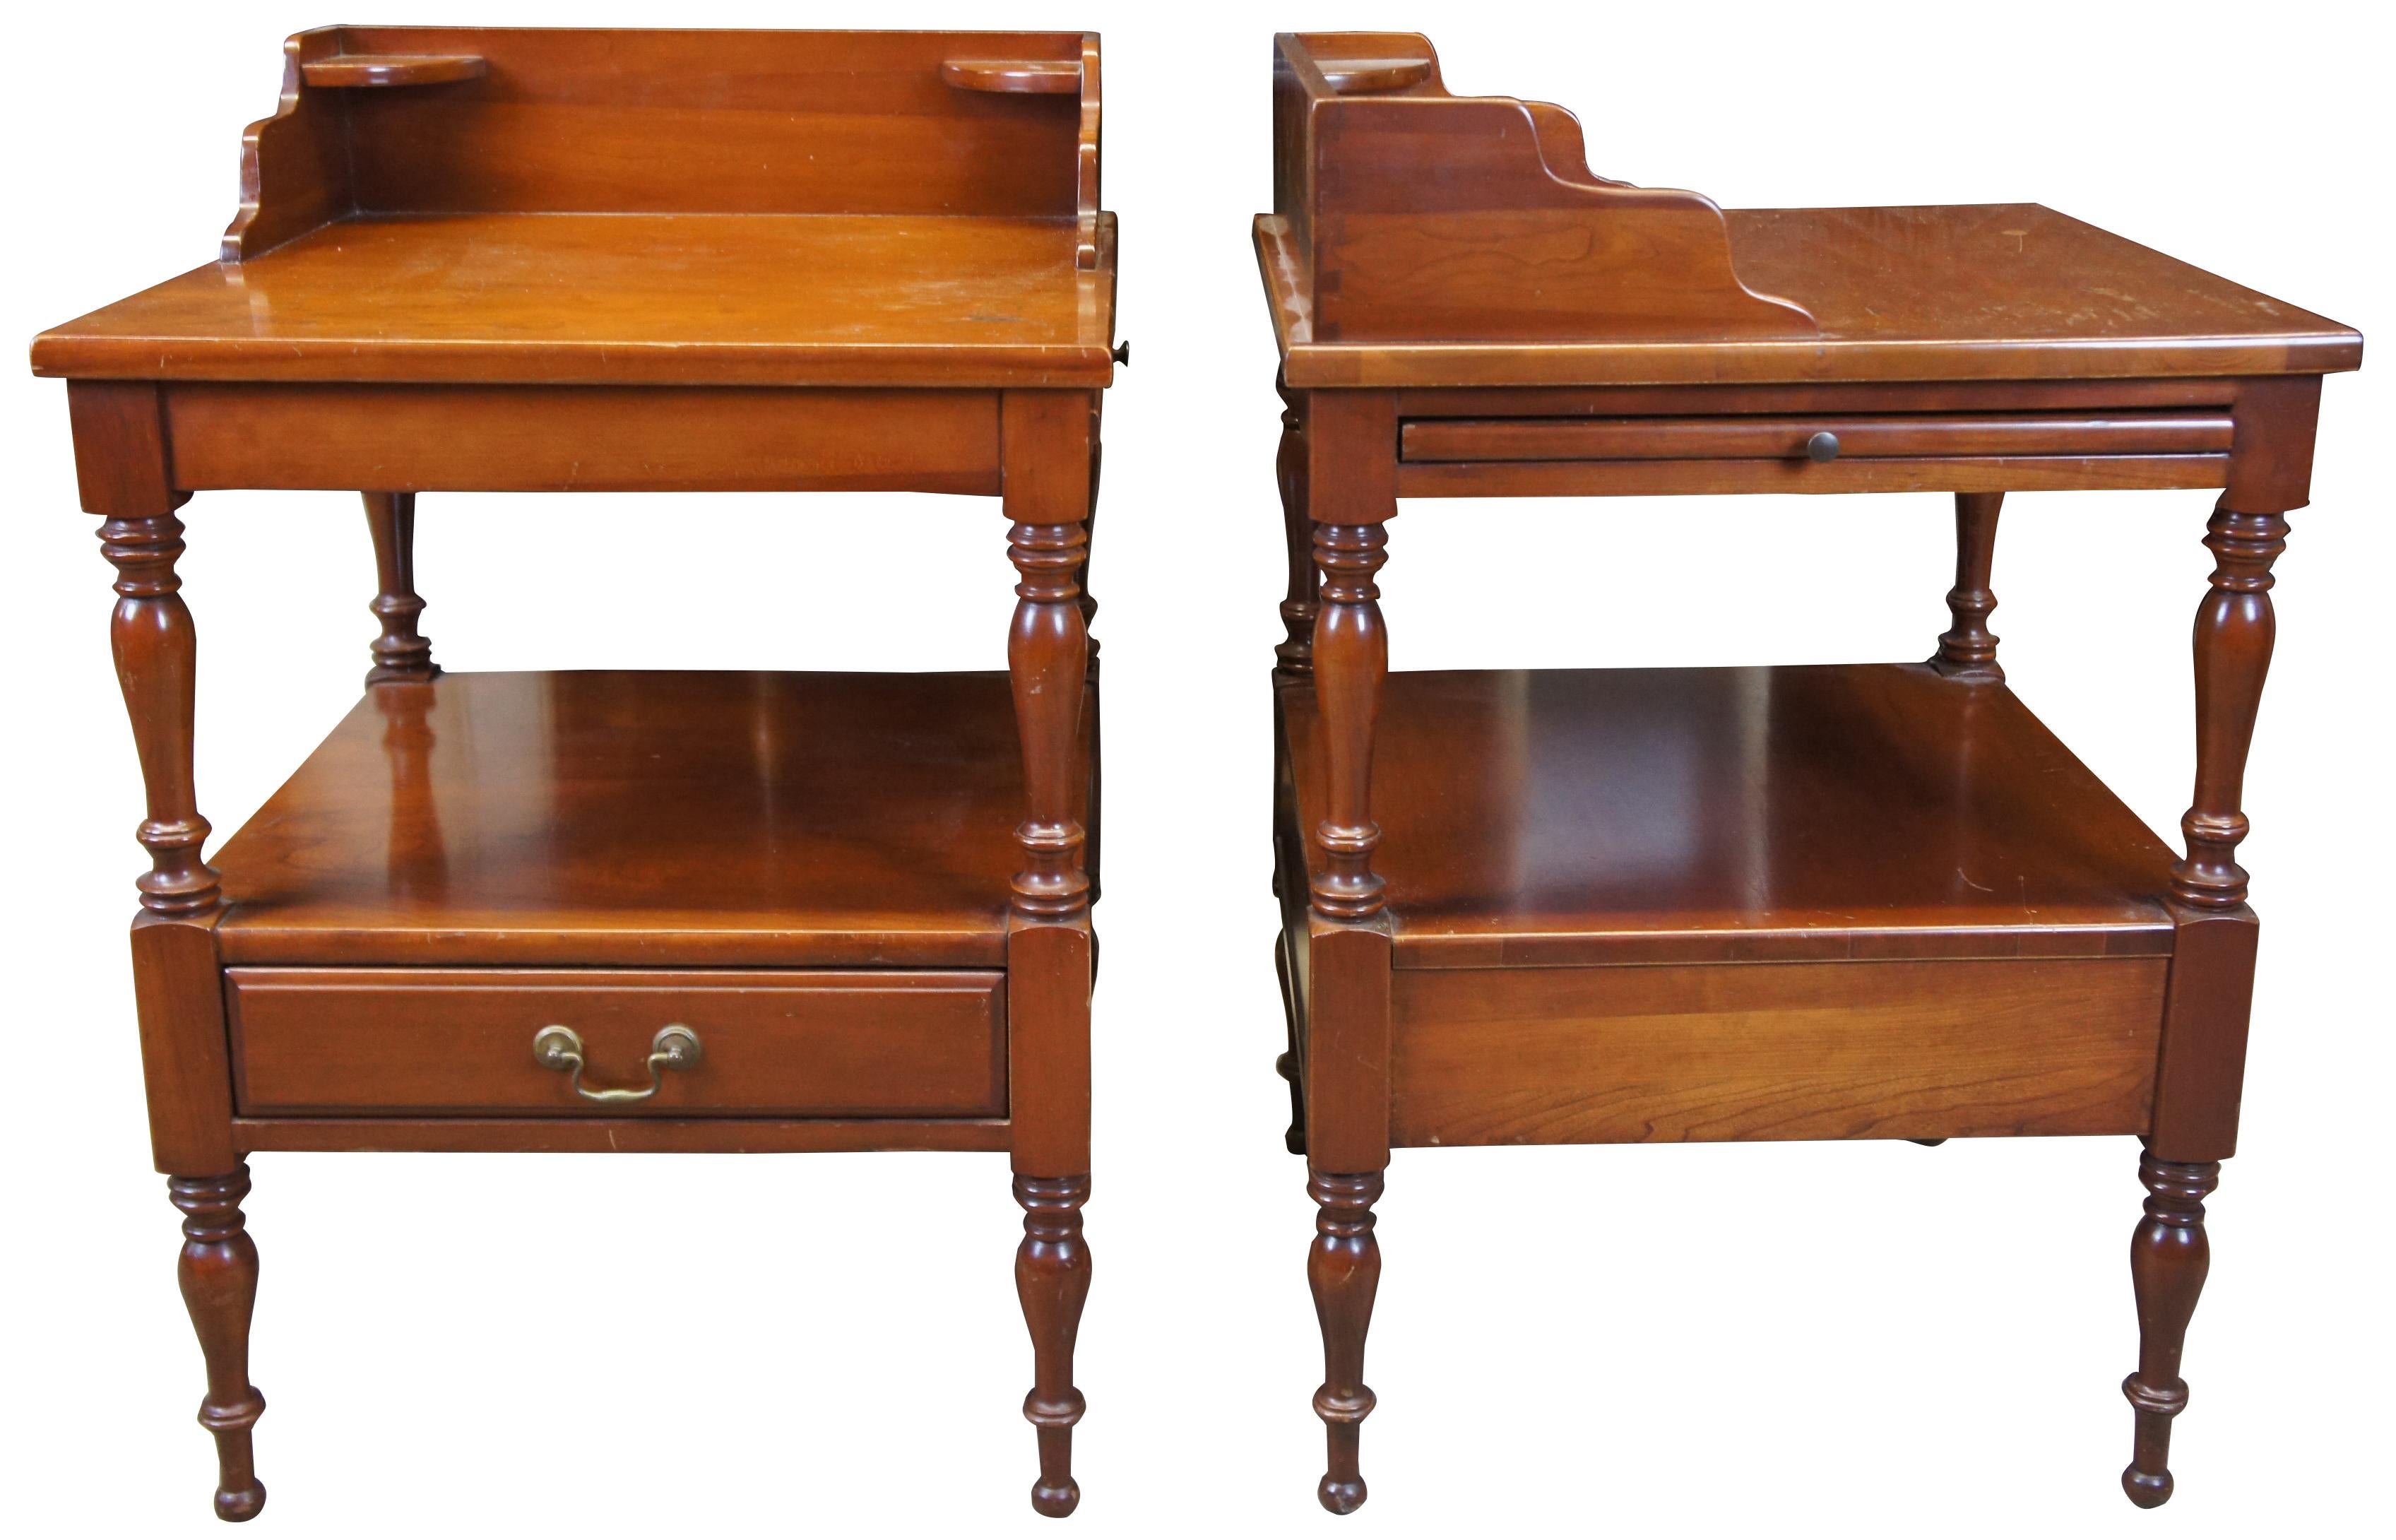 Two Empire Furniture Corp colonial / early American style side tables. Made from cherry with a two tier design with pullout shelves, lower drawer and backsplash, circa 1957. Empire Furniture Company is no longer in business. The company’s vintage